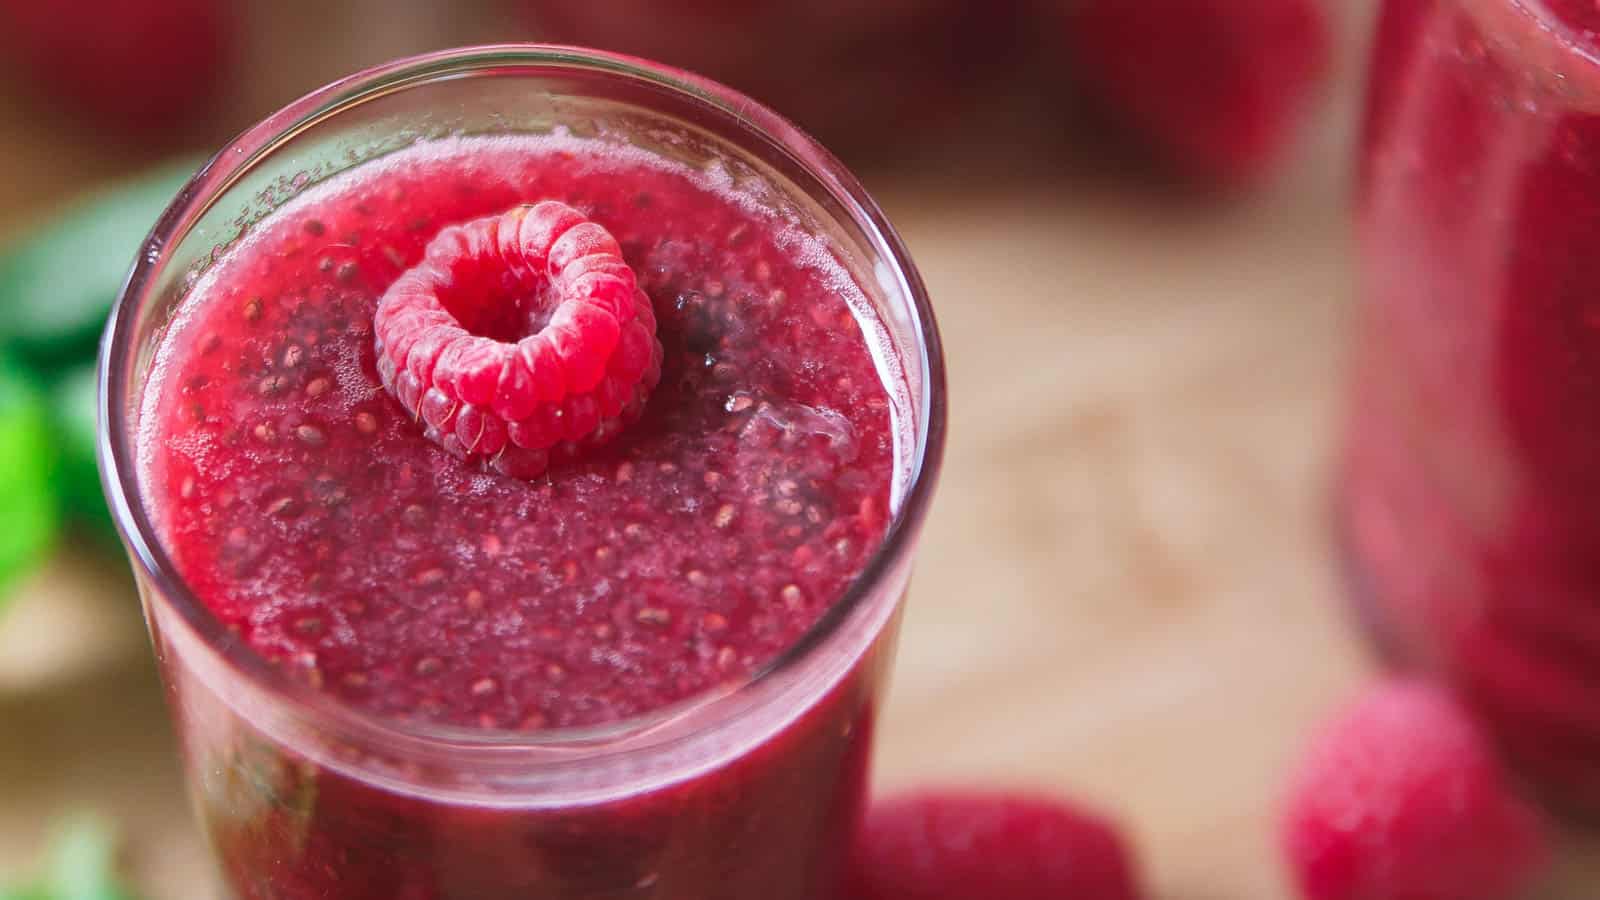 Raspberry chia lemonade in a glass garnished with a raspberry.